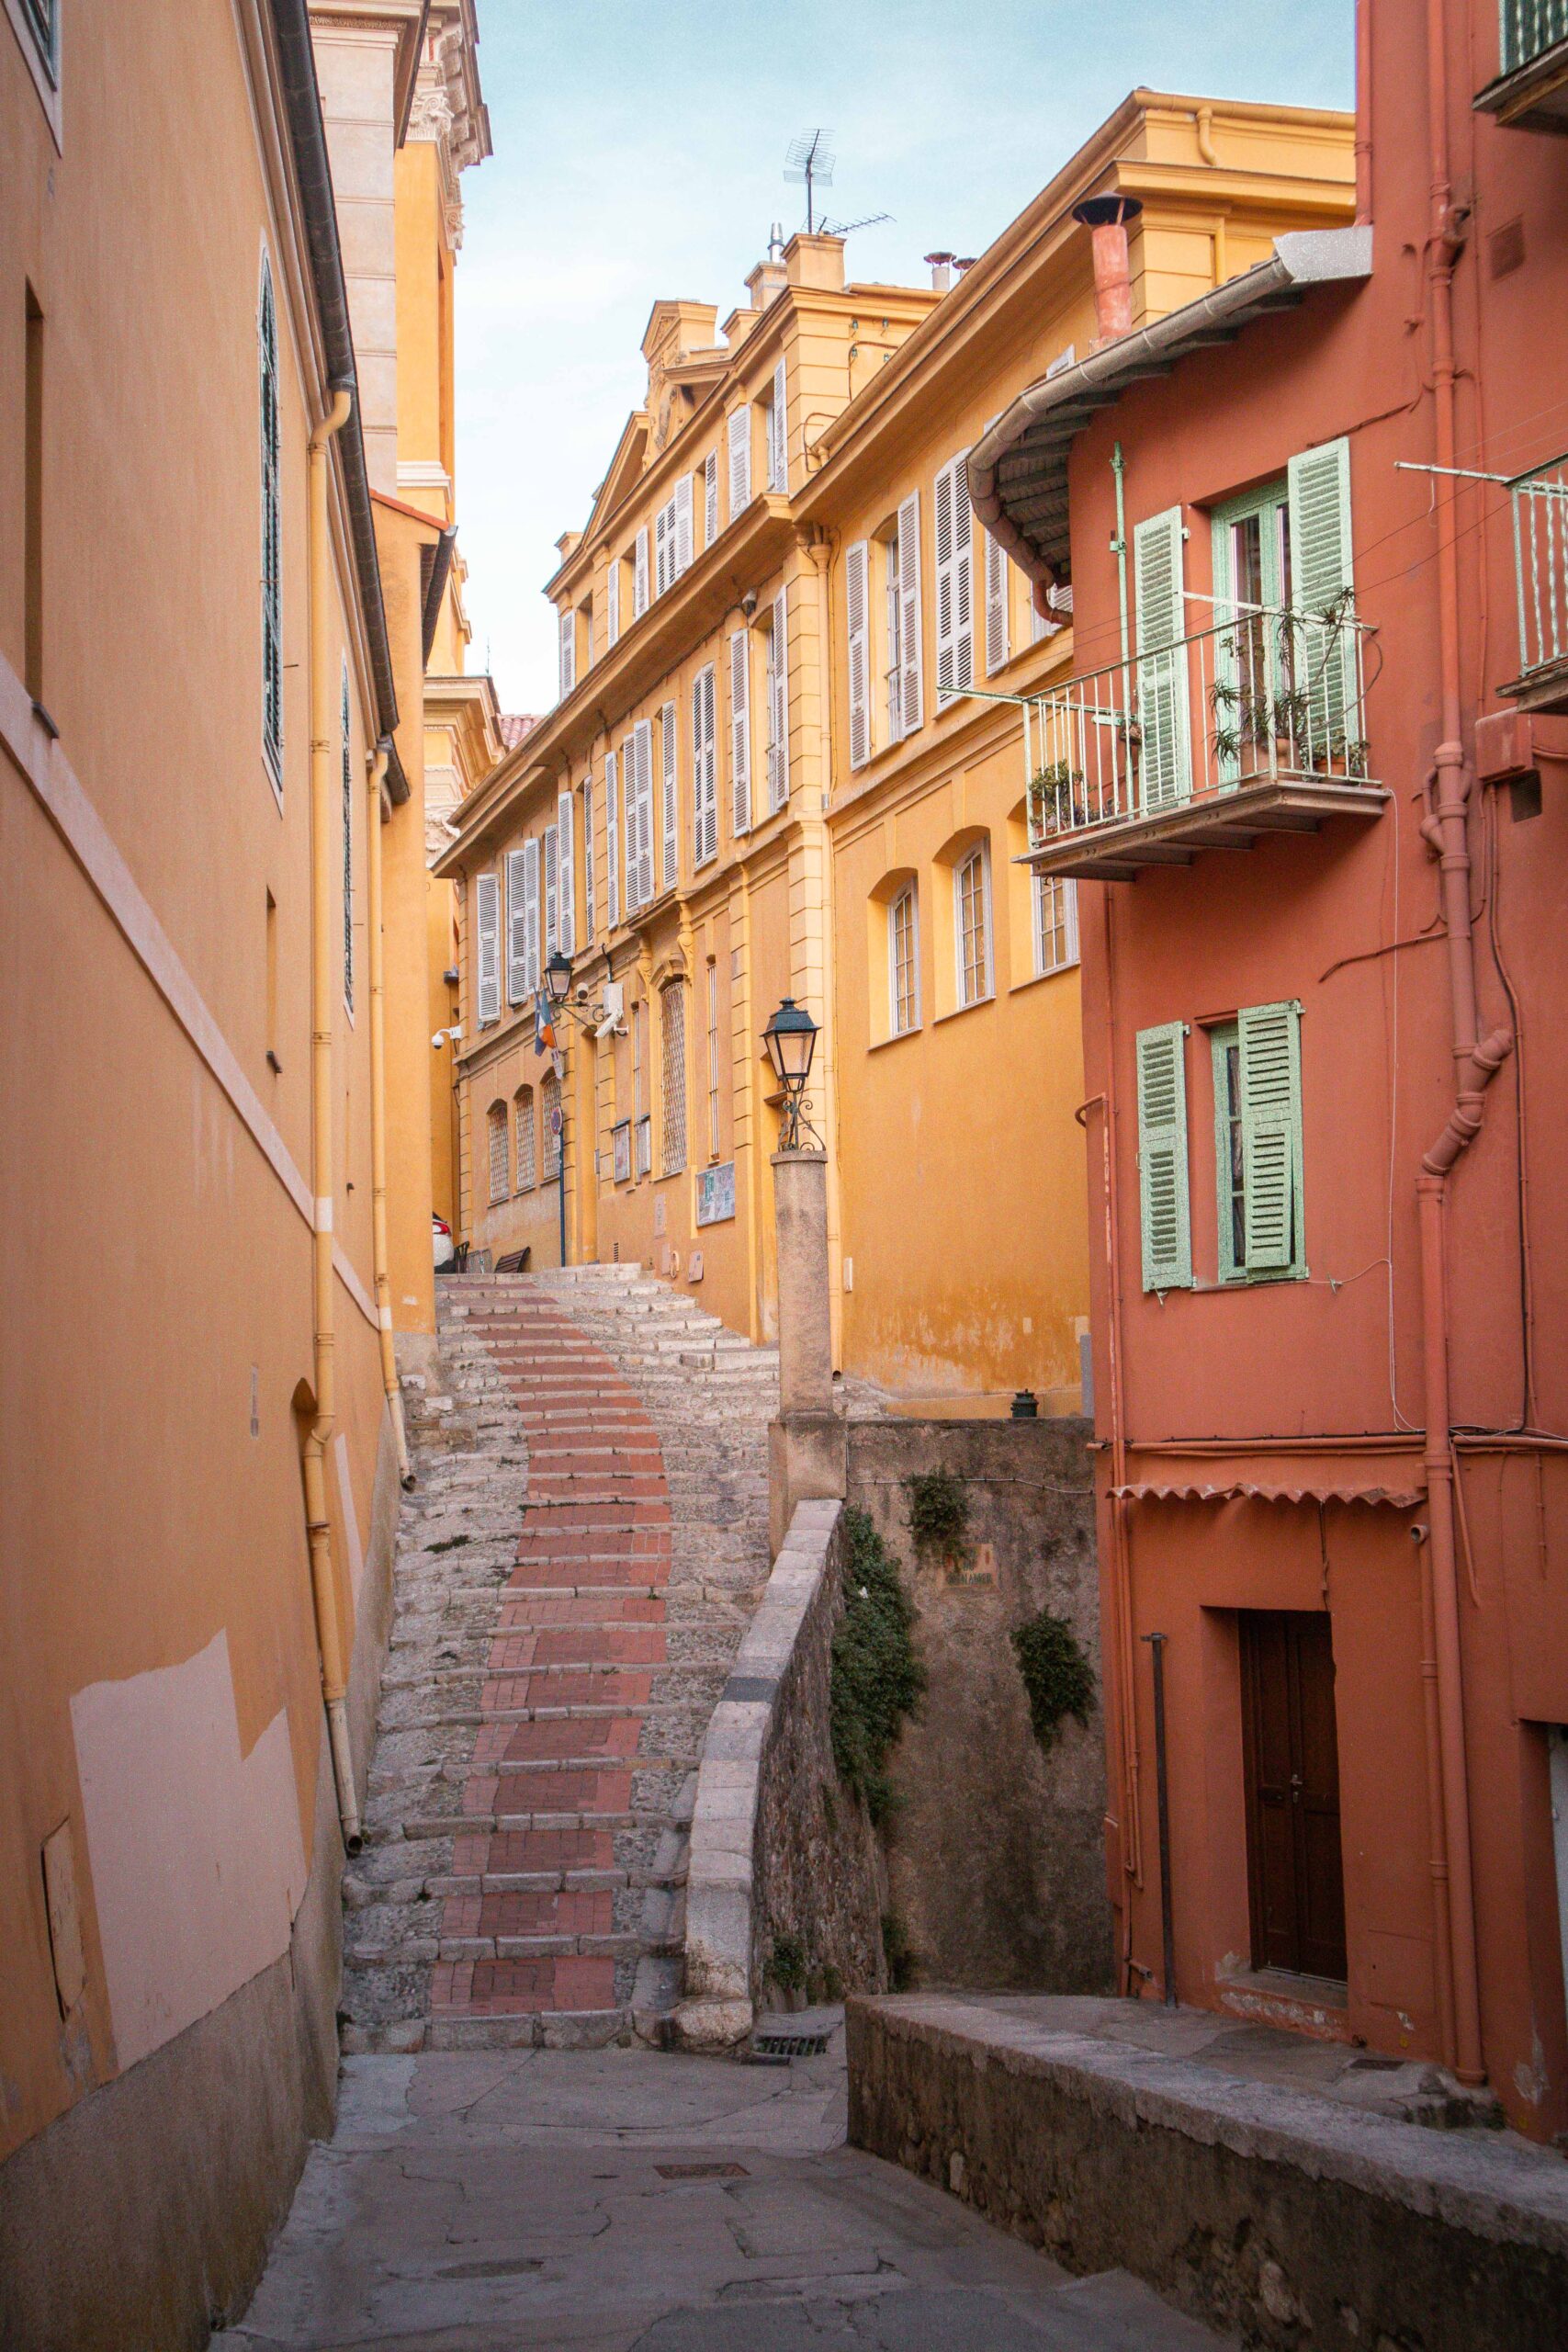 Staircase in a colourful street ("Rue du Palmier") located and leading to the Saint Michael Archangel Basilica in the Old Town of Menton, France